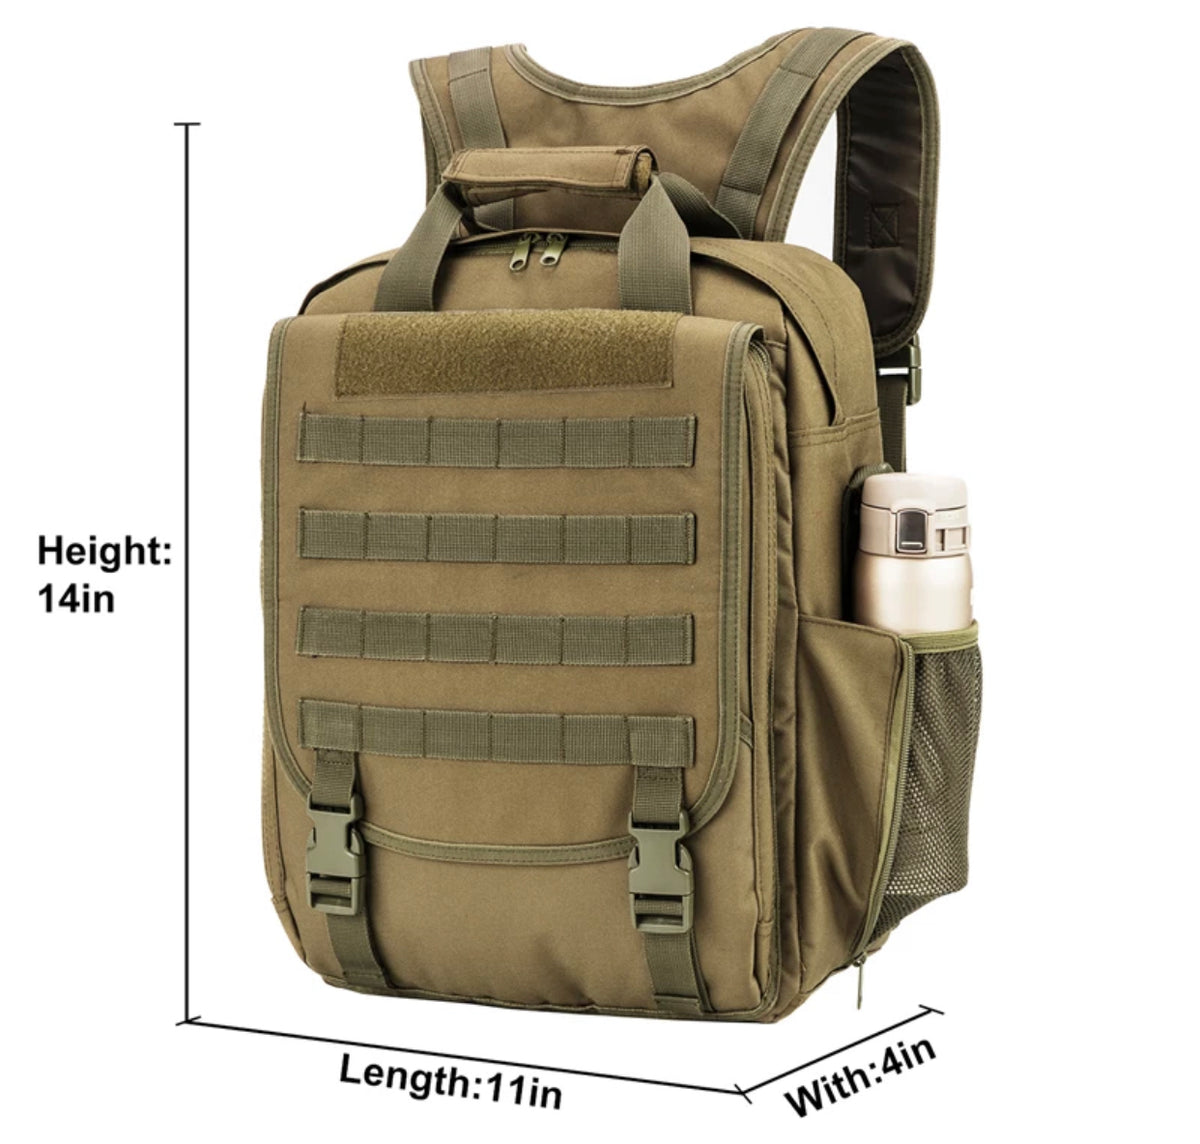 Redemption Tactical Laptop Operator BackPack